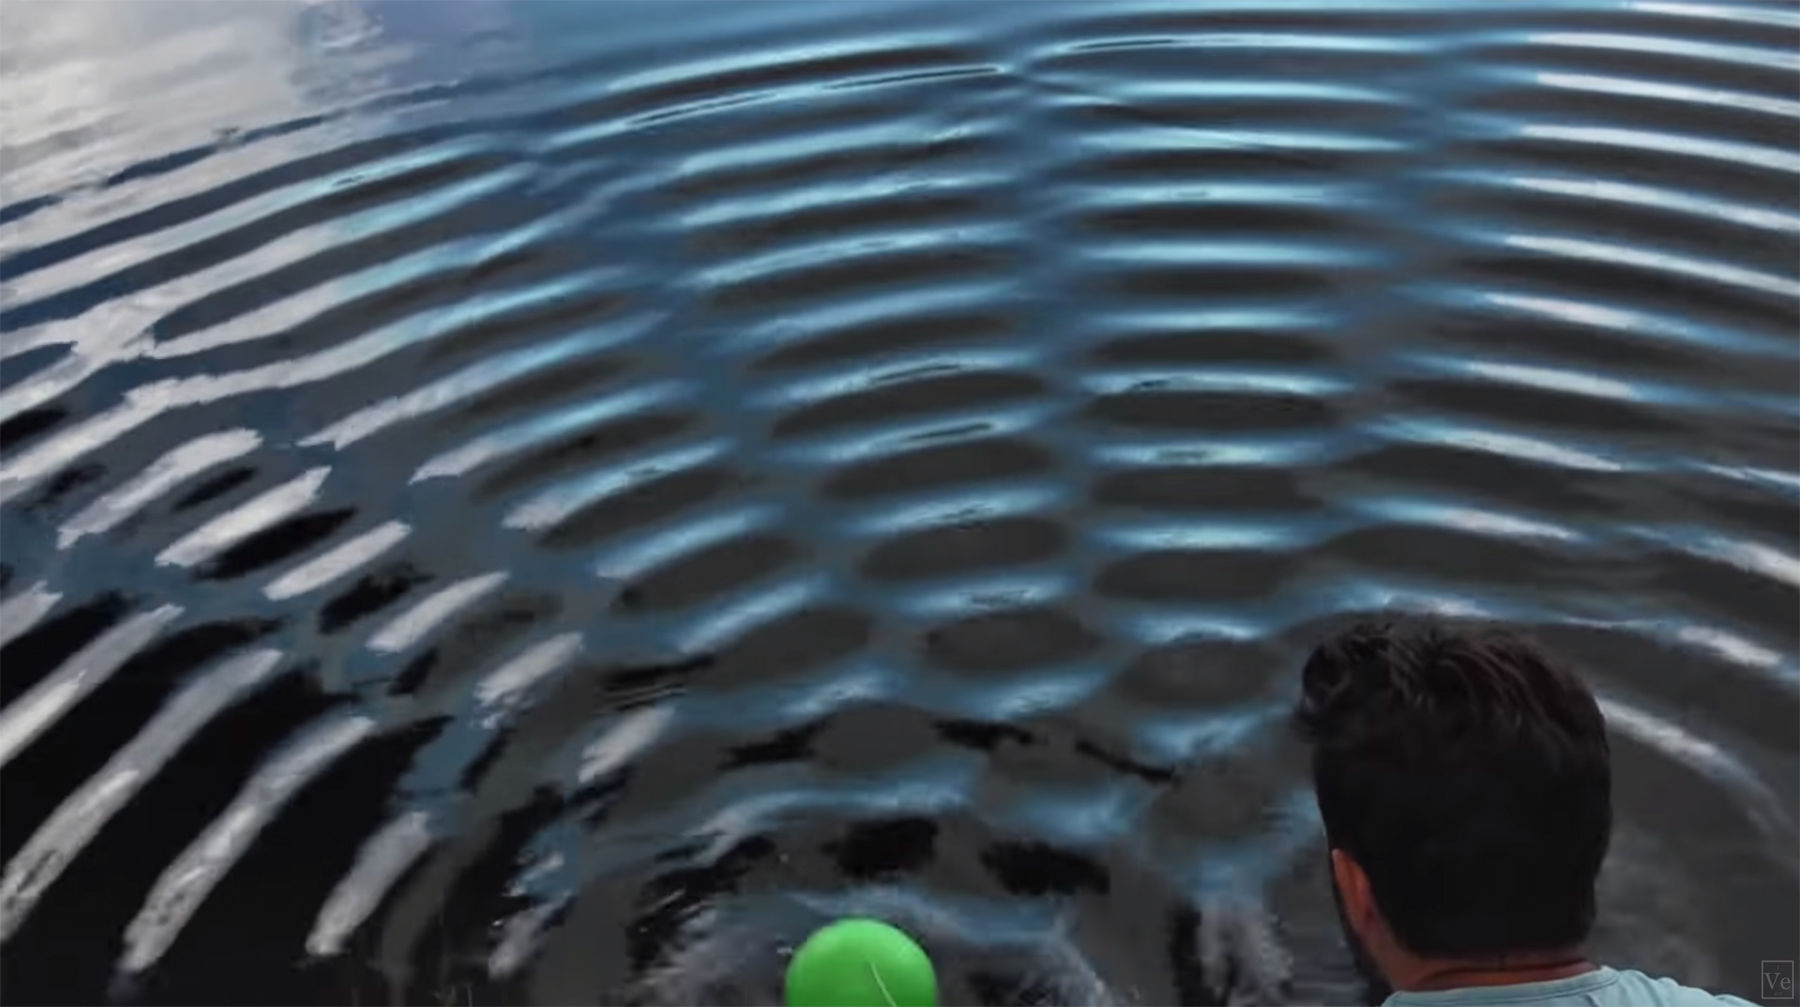 A wave interference pattern created by oscillating two balls in water. Each ball sends out a circular wave, and where they meet the wave crests and trough interact. Credit: Derek Muller, Veritasium (from the video). 